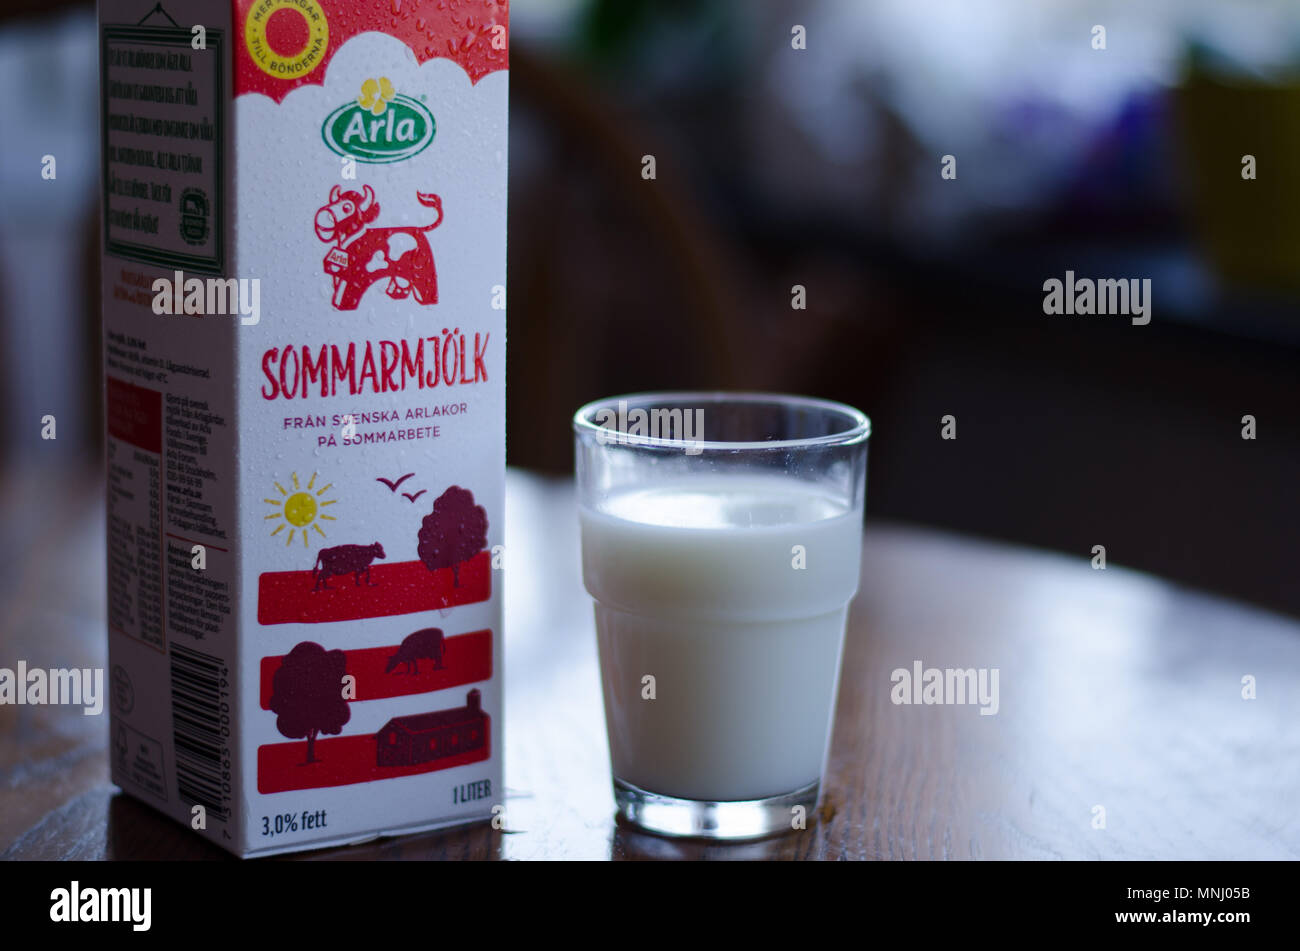 Stockholm, Sweden - 12 may 2018. A carton of milk and a glass of Arlas new milk 'Sommarmjölk', made to give the farmers more money for their productio Stock Photo